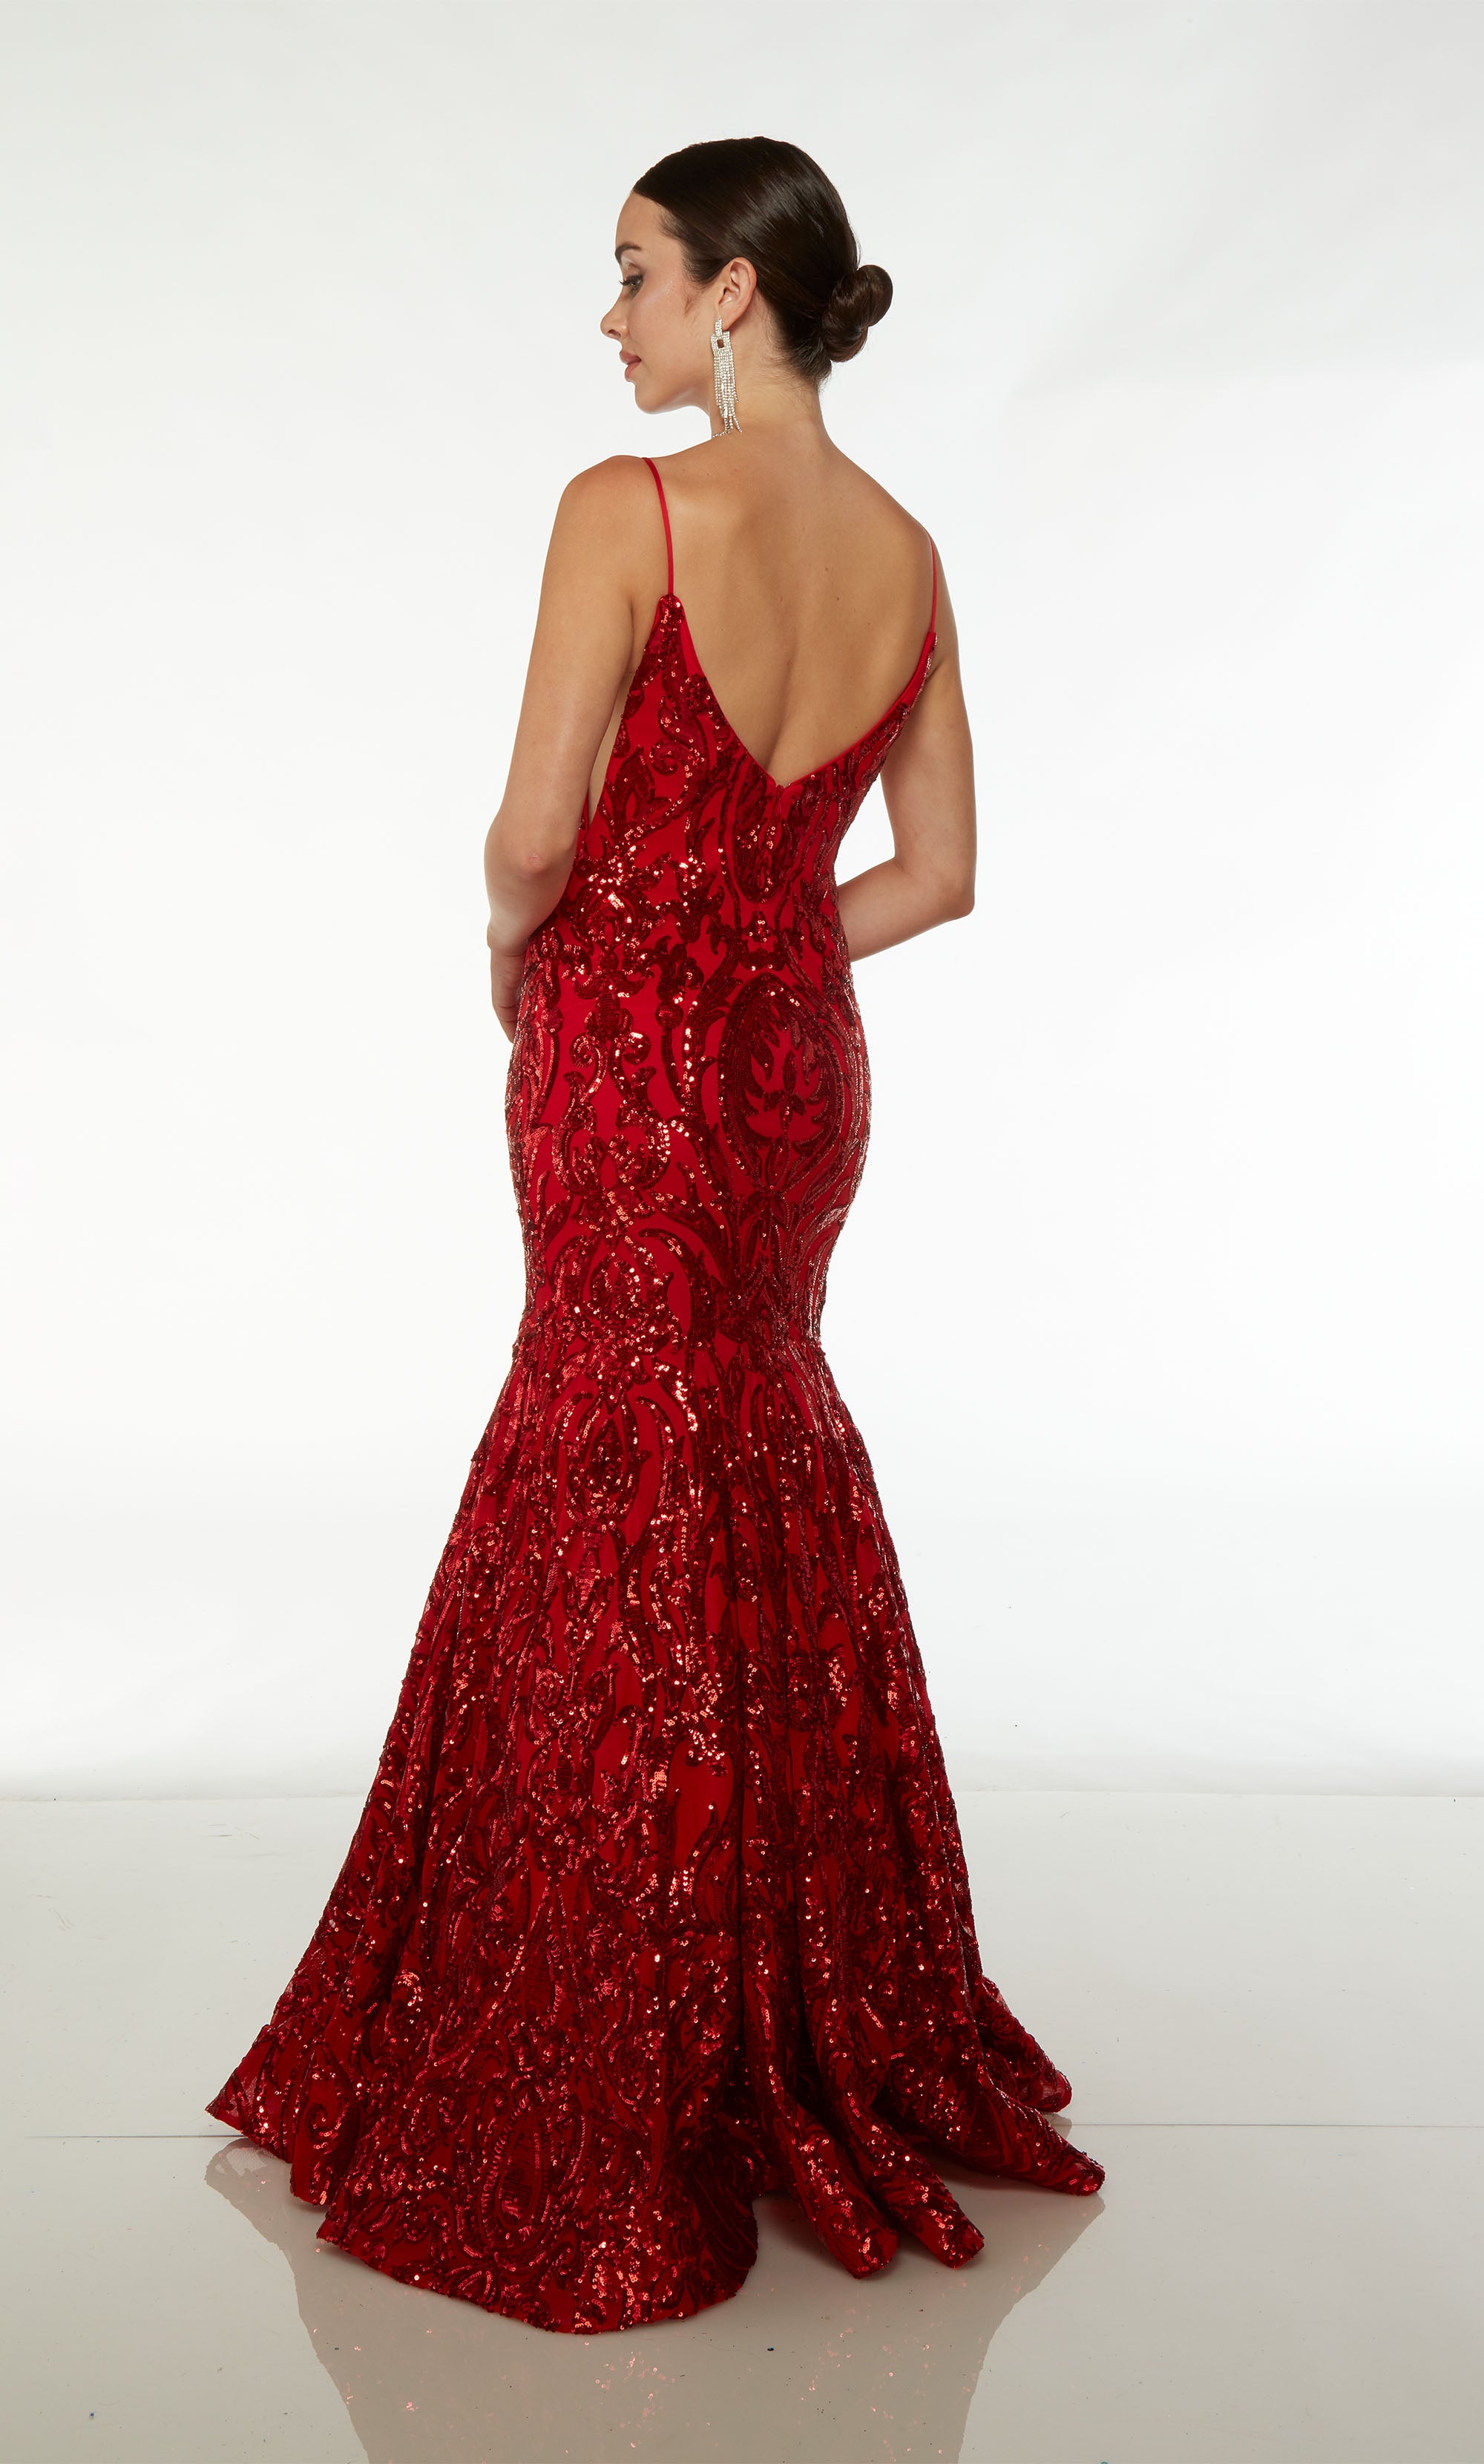 Elegant red sparkly mermaid prom dress: plunging neckline, illusion cutouts, V-shaped open back—an dazzling and sophisticated ensemble.